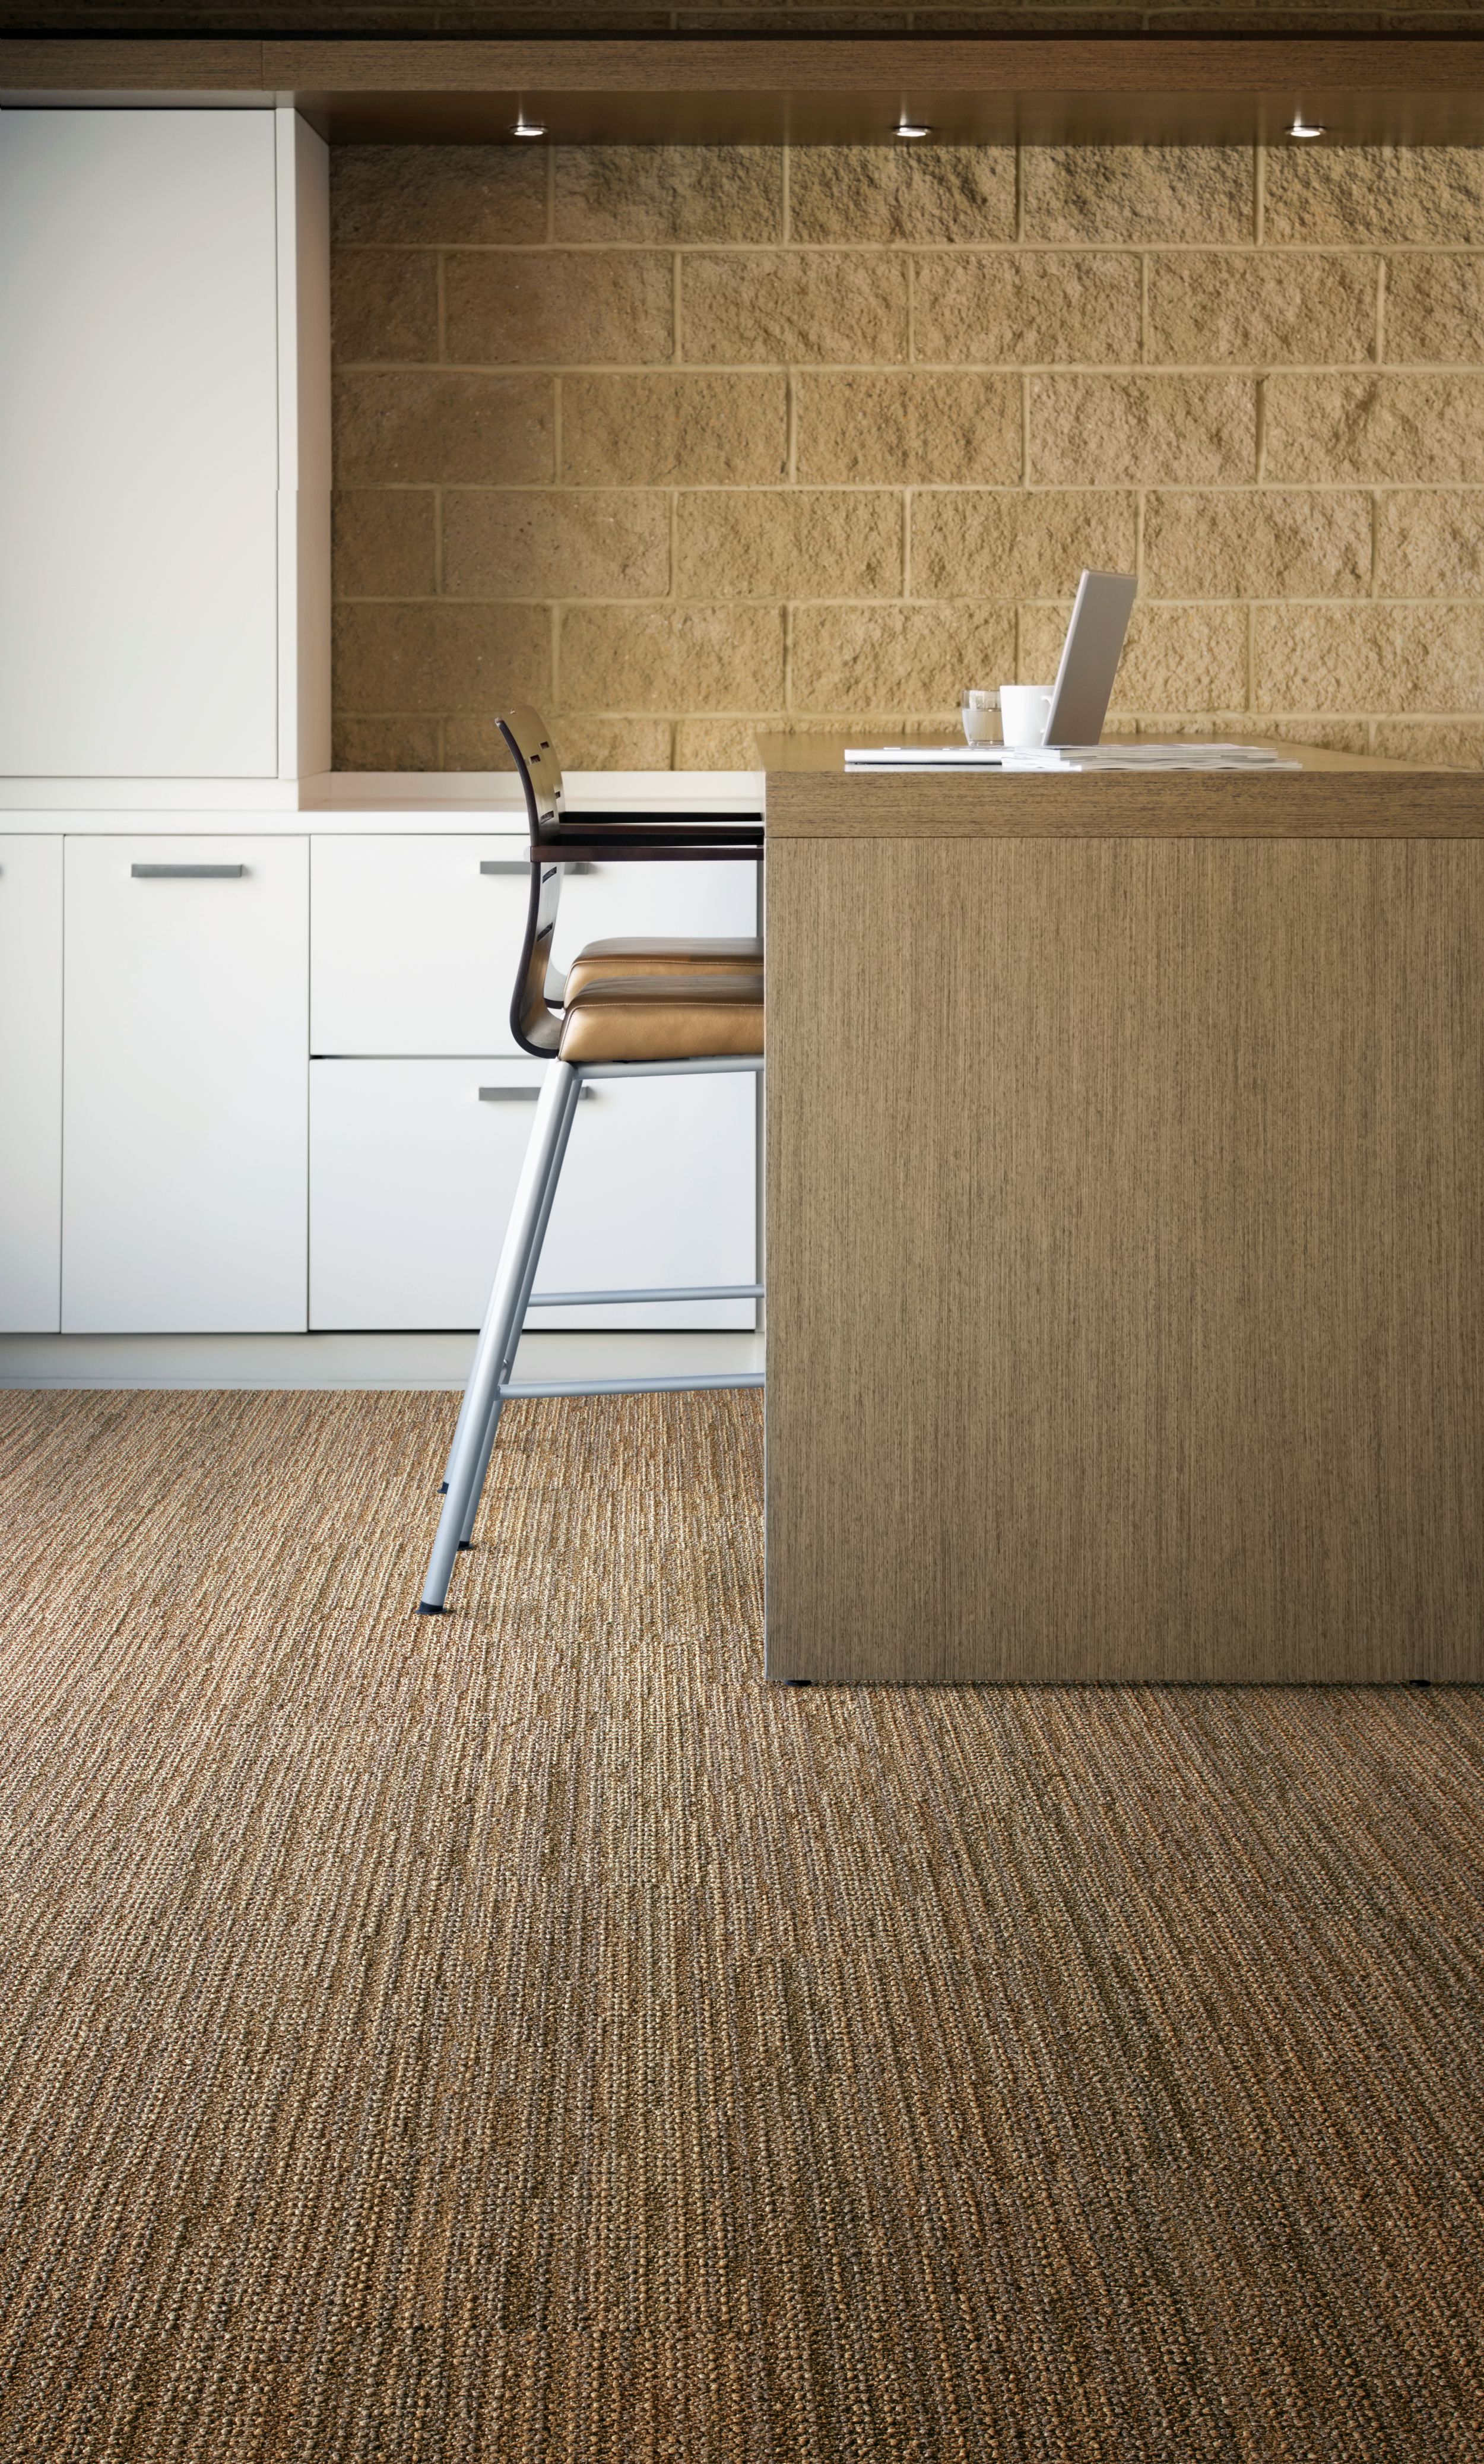 Interface Afternoon Light carpet tile in workspace with white file cabinets and desk numéro d’image 5